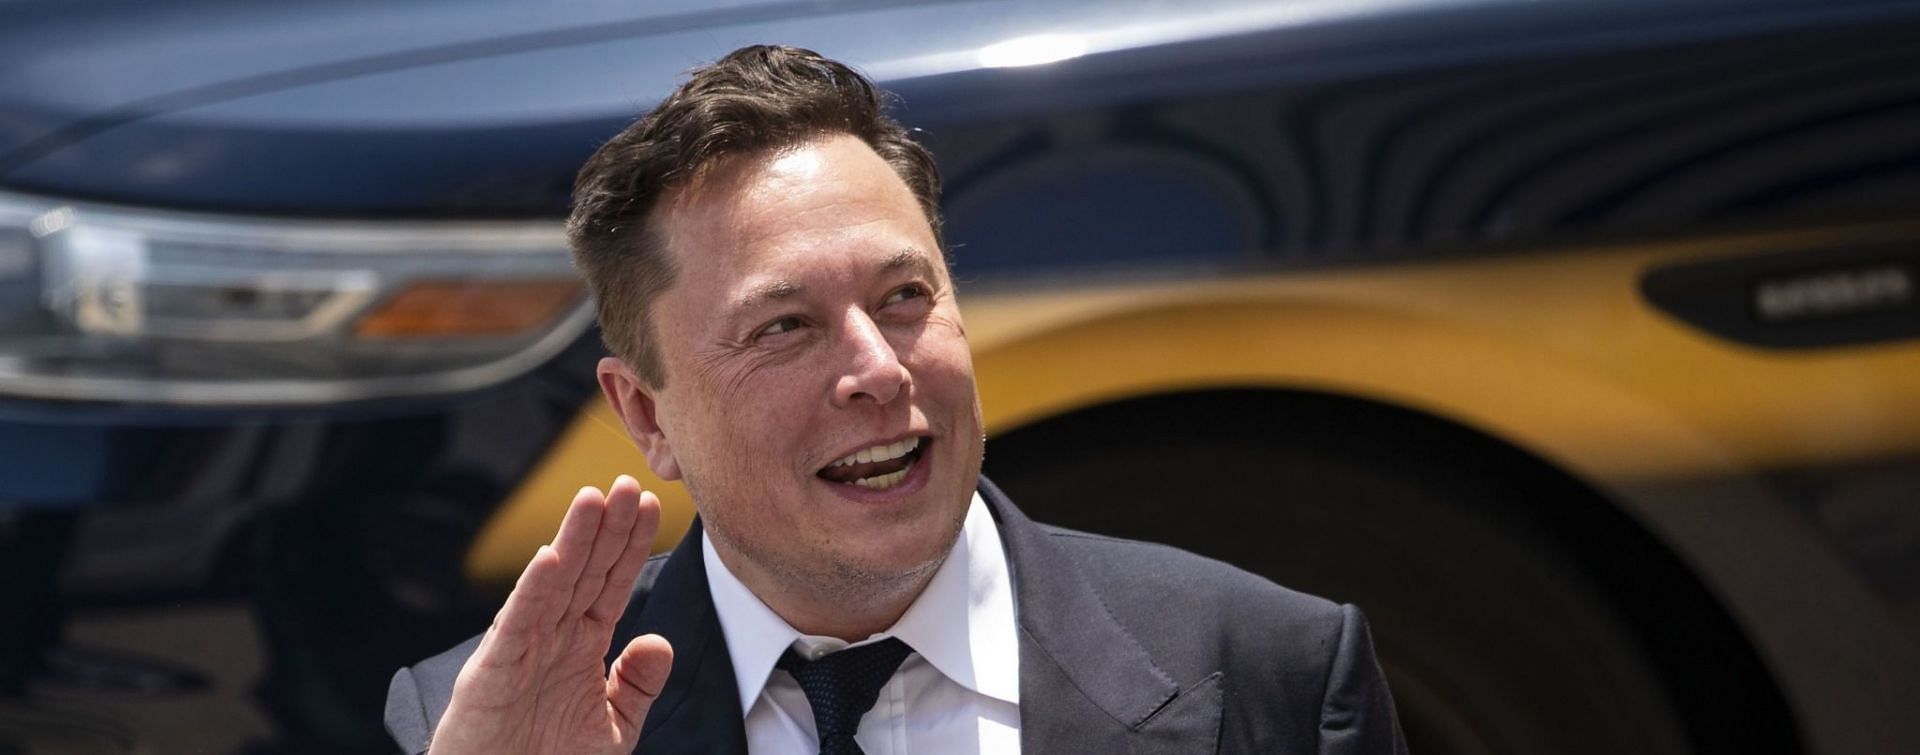 Elon Musk can face up to $15 billion tax bill this year (Image via Al Drago/Getty Images)